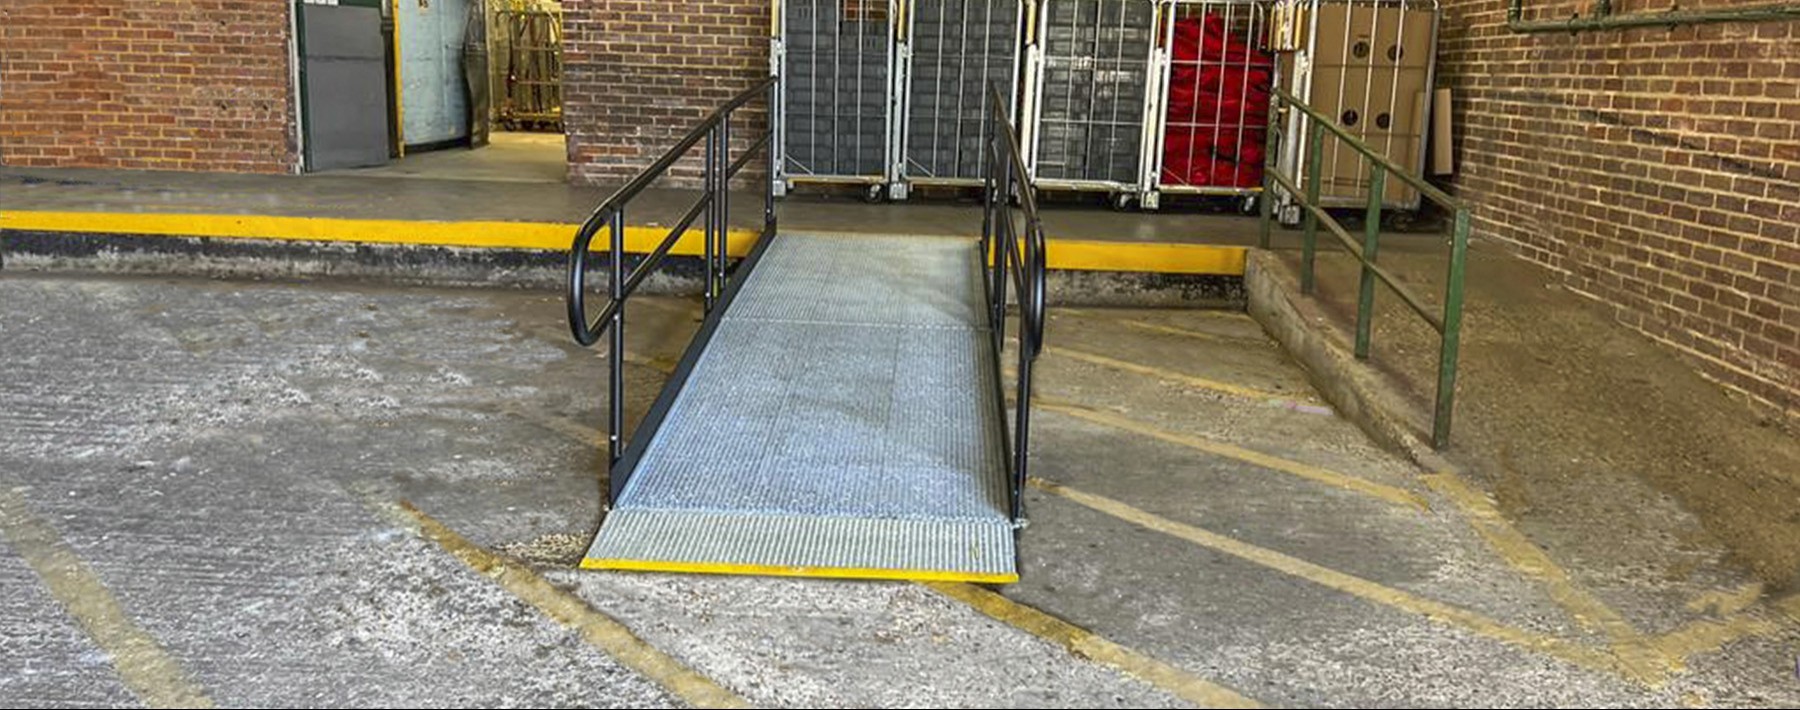 Ramp for trolleys, royal mail case study